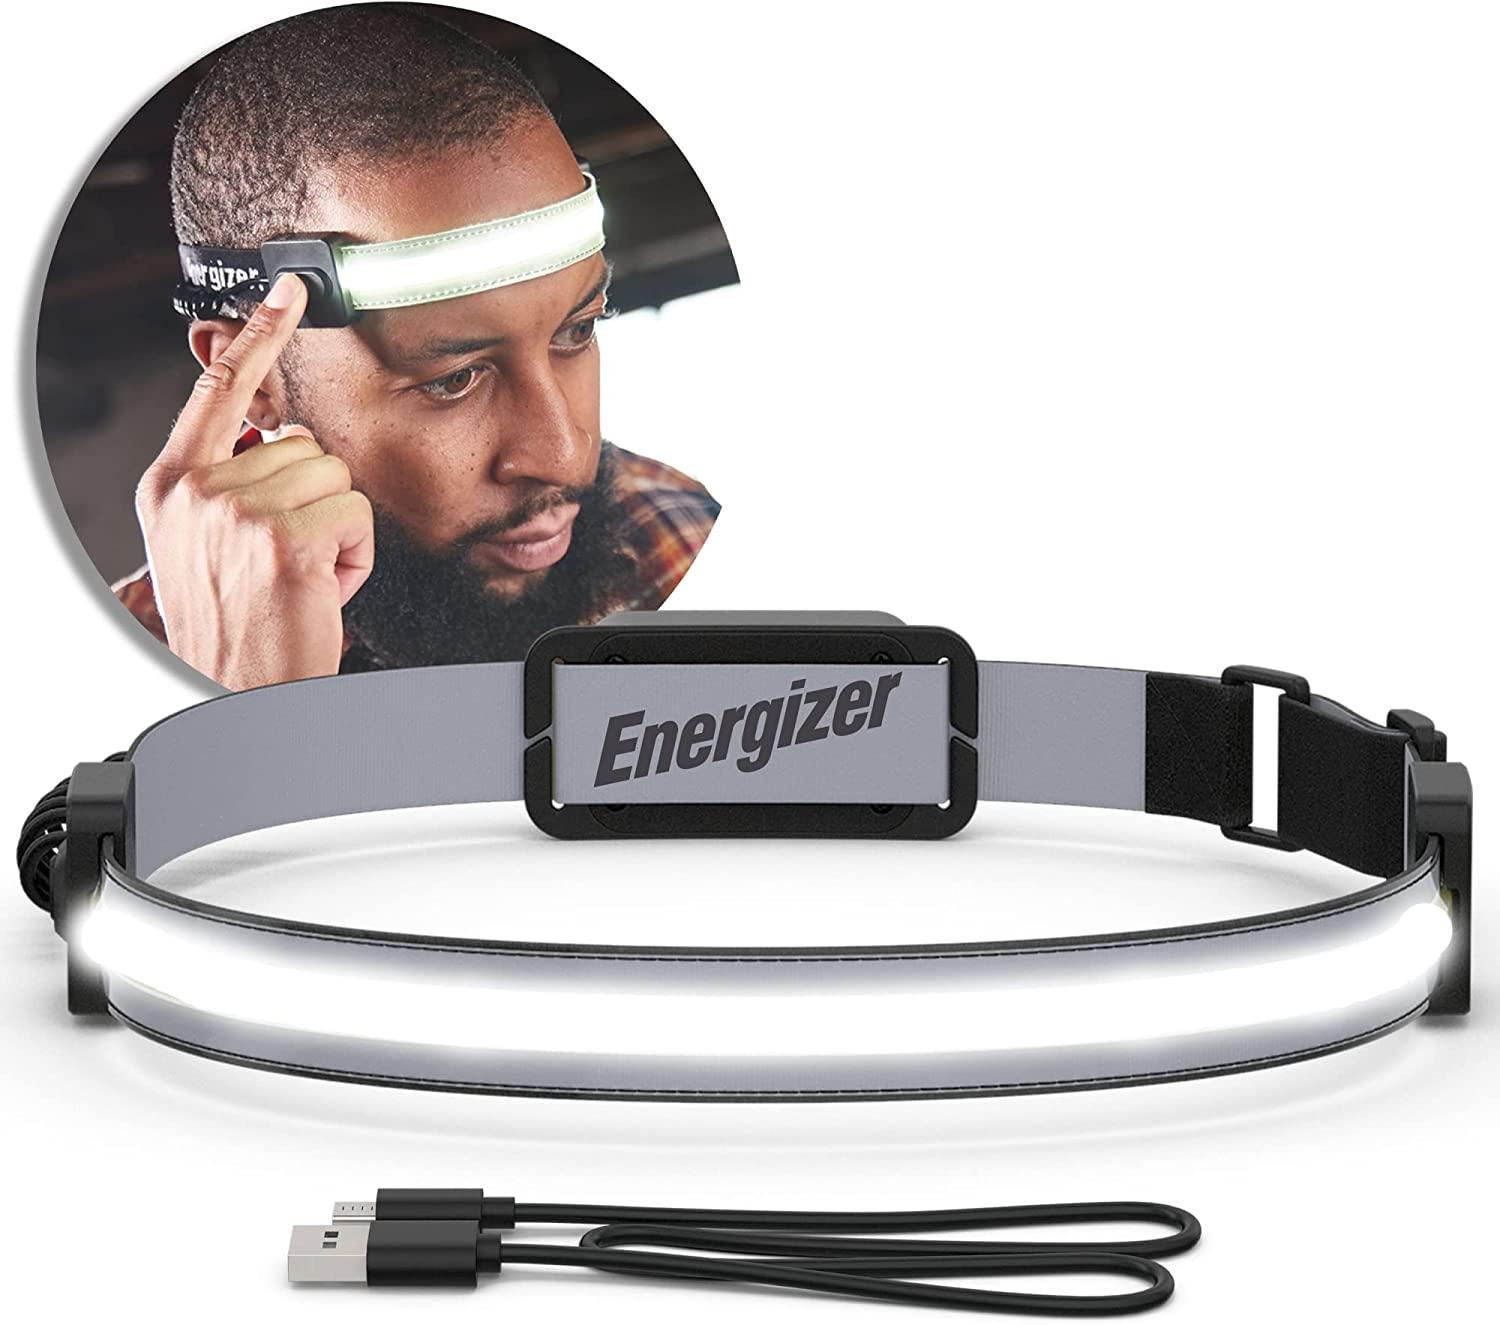 Energizer Headlamp Rechargeable S400 for $8.99